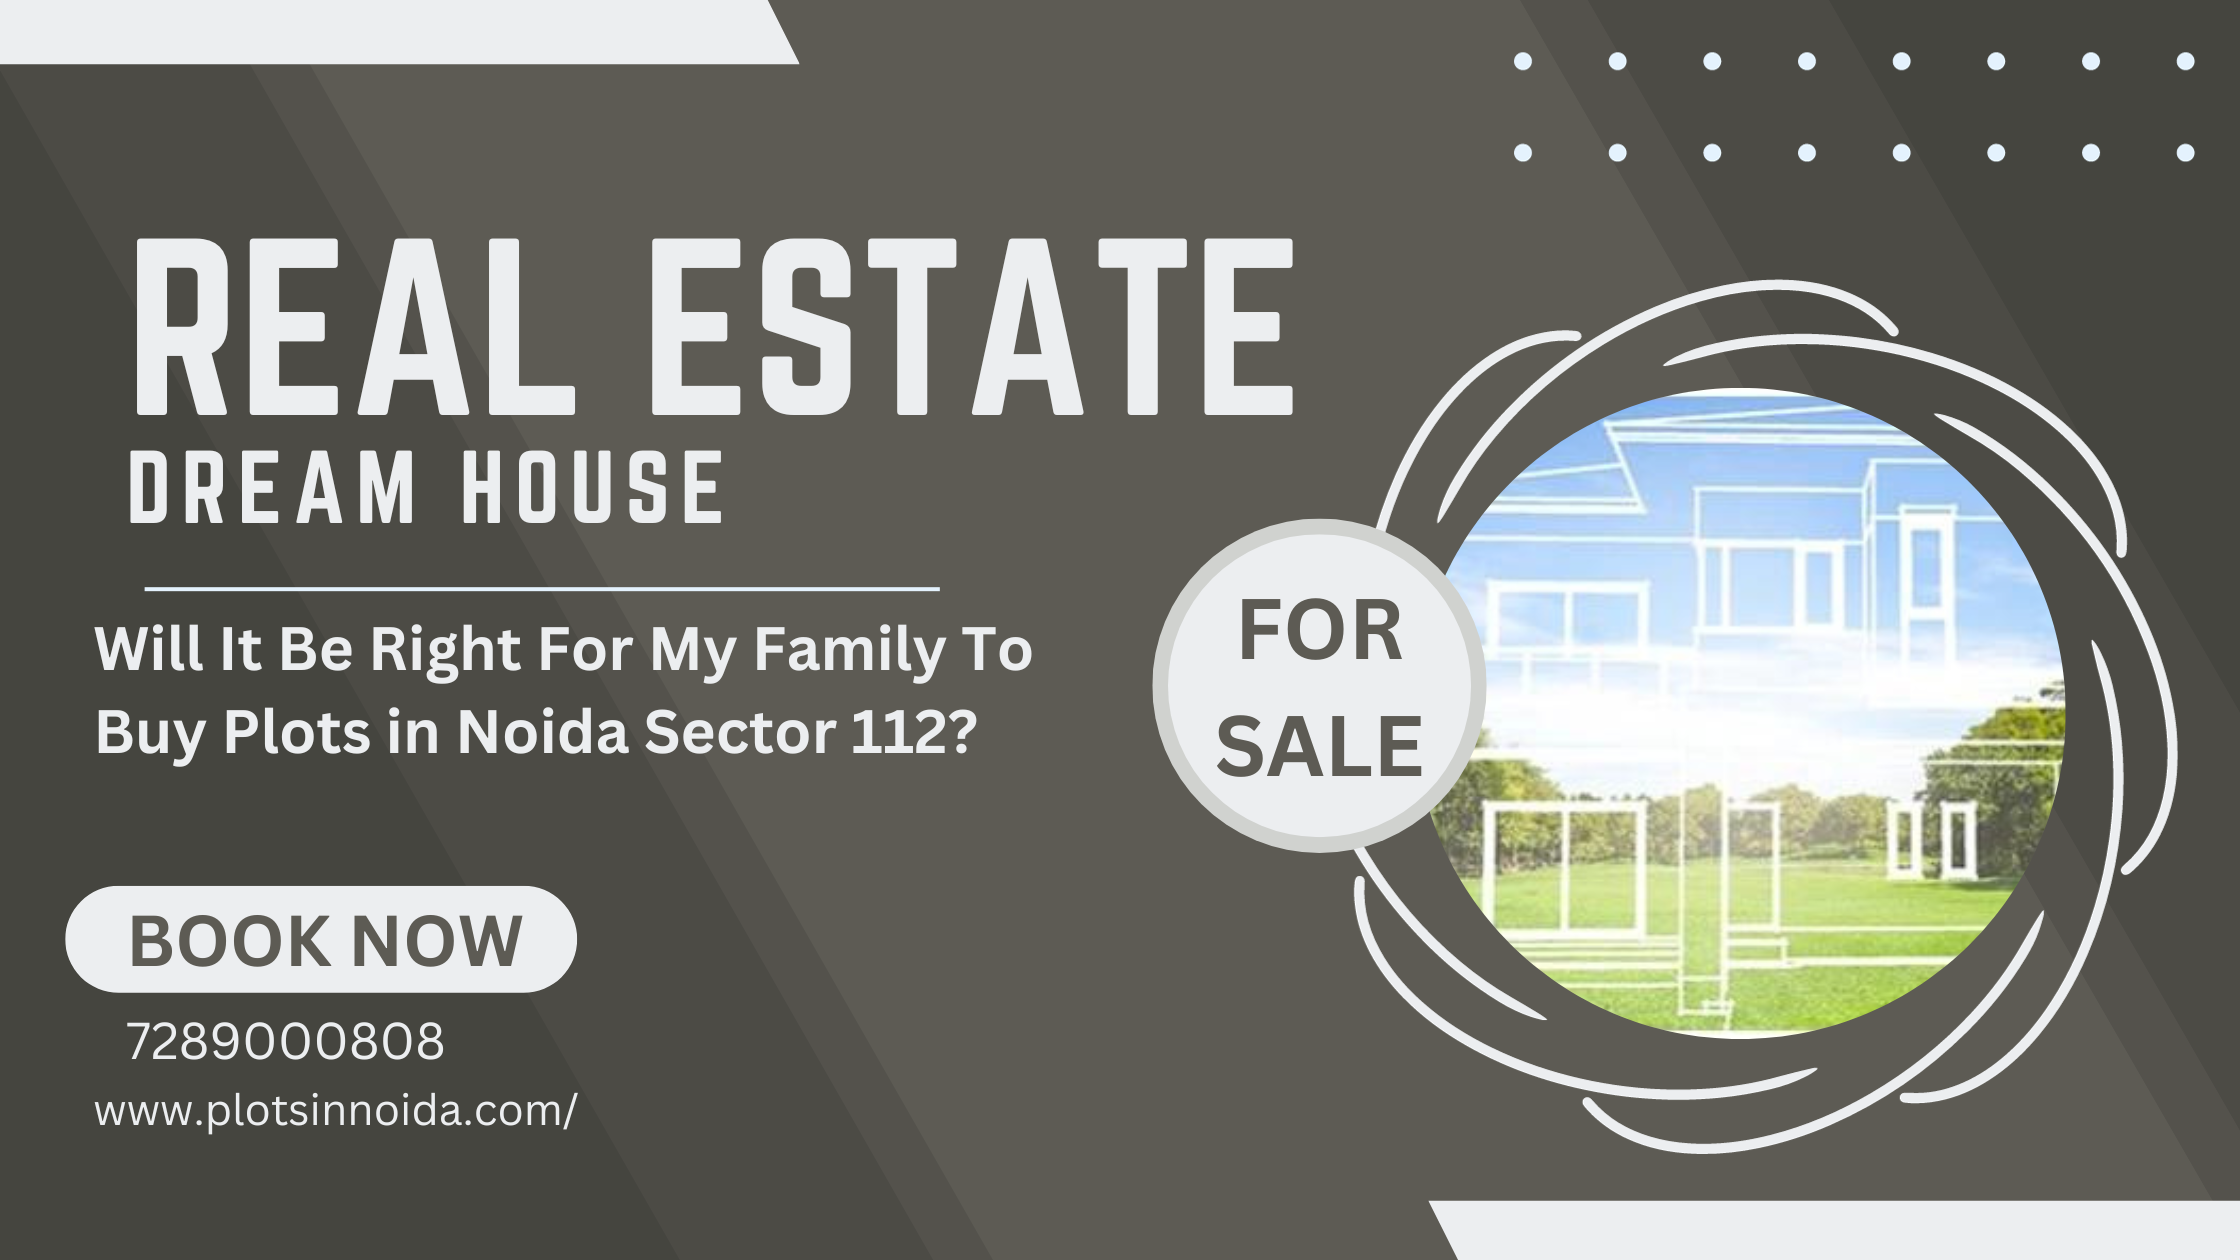 Will It Be Right For My Family To Buy Plots in Noida Sector 112? - Articles Webhunk